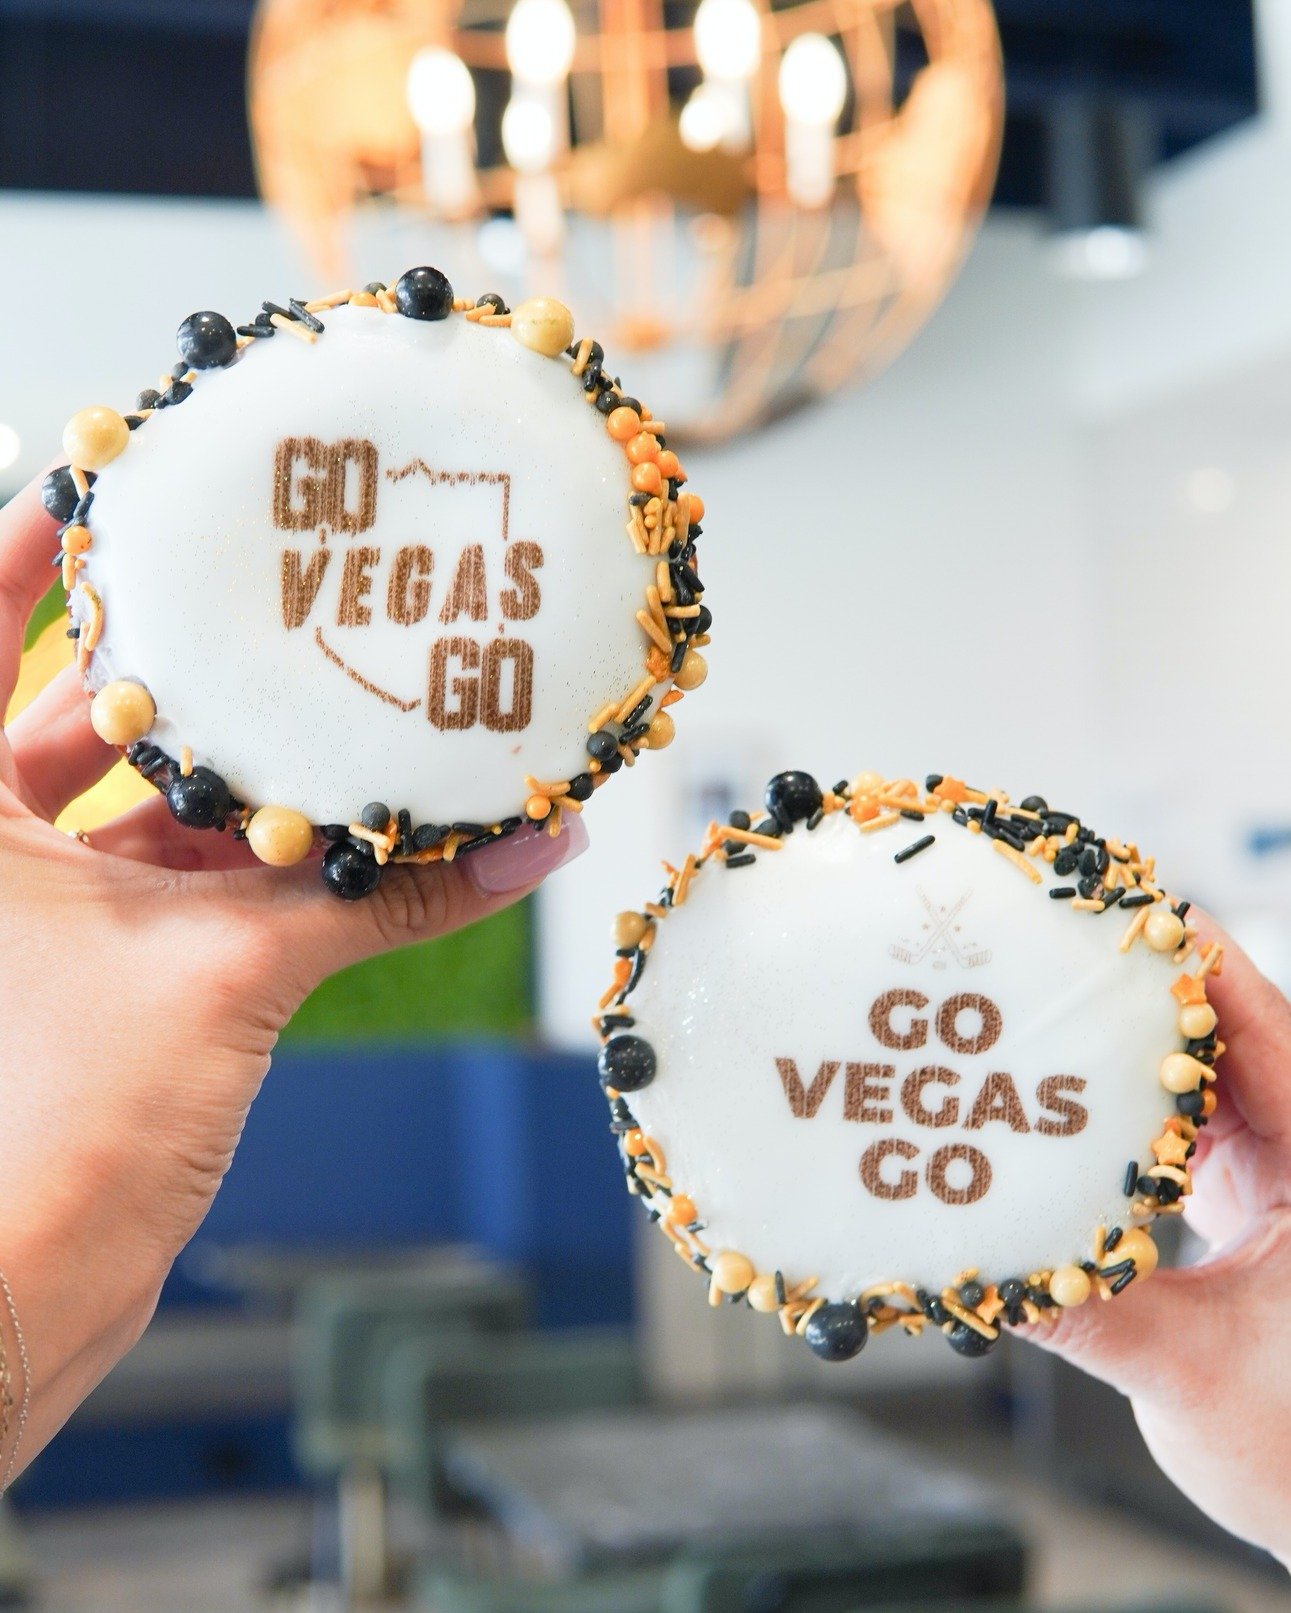 Vegas is back baby! 🤩 Celebrate every game day with our Golden Playoff Doughnut &amp; pizza to feed the whole crew 😎🏆

Our Golden Playoff doughnut is filled with exclusive golden caramel pastry cream. ✨ 
 
Limited quantities will be available ever